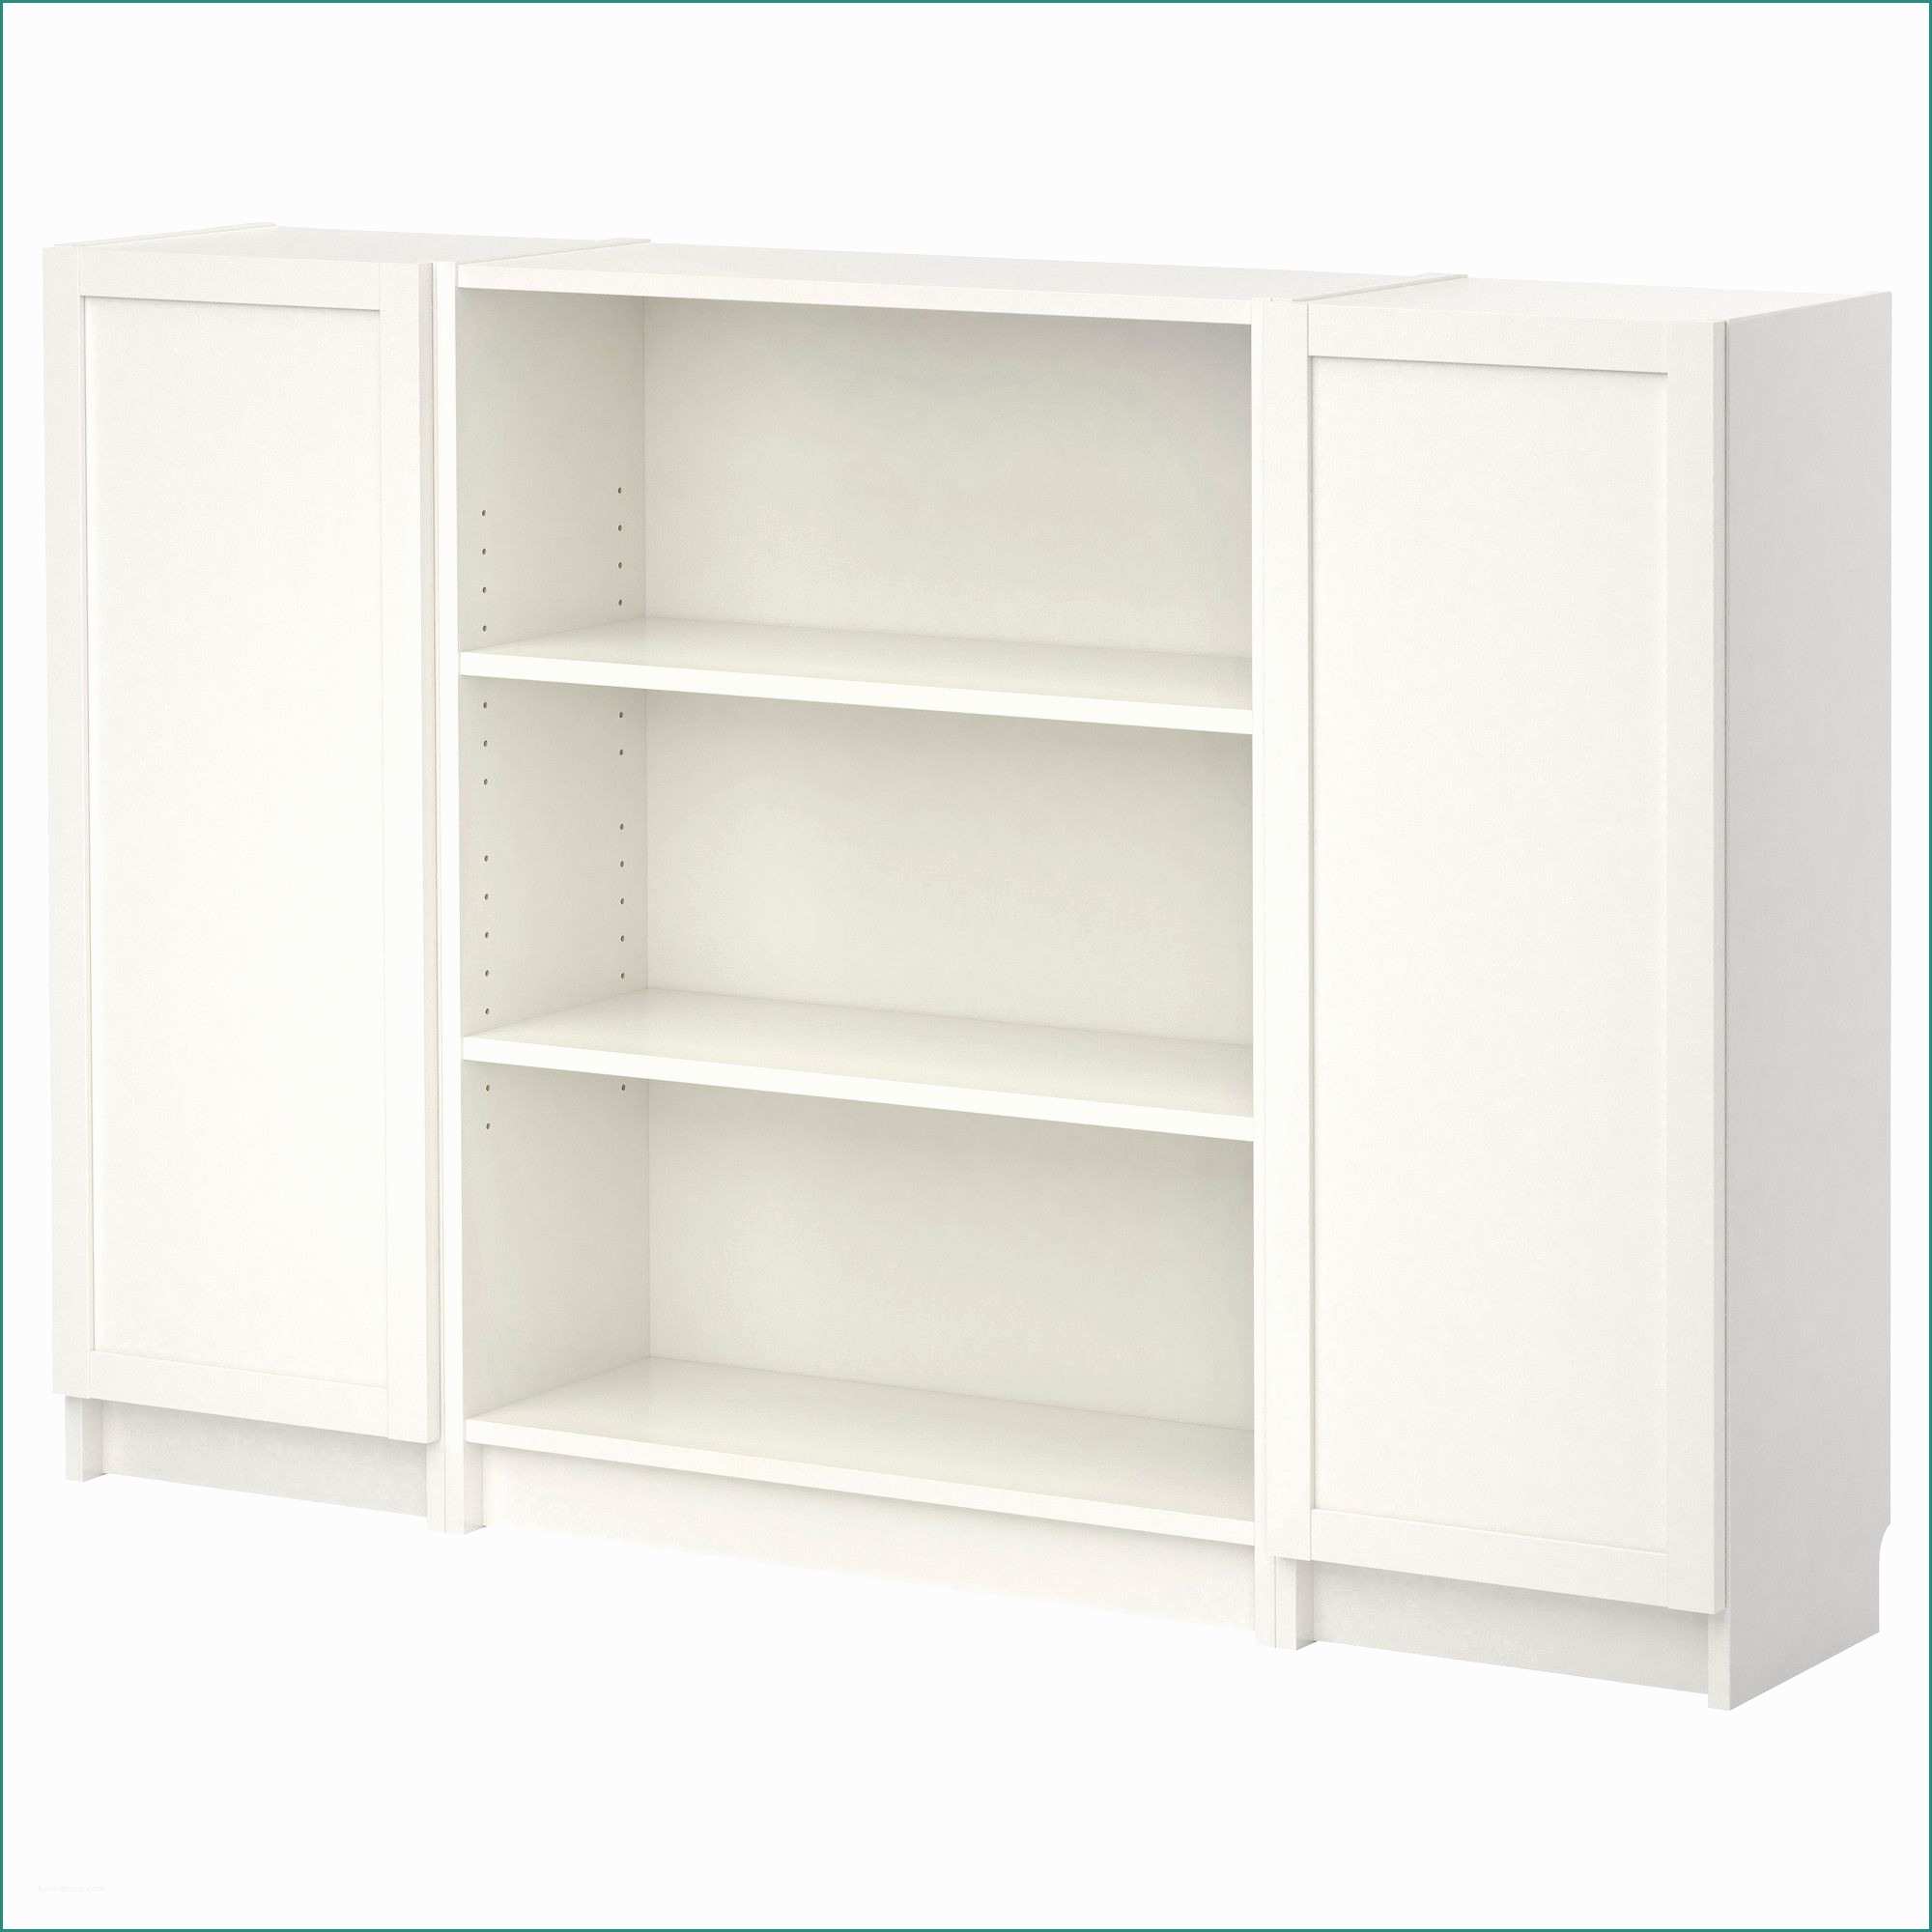 Porte A Libro Economiche Ikea E Billy Bookcase with Doors White Ikea Would Like This Set Up for